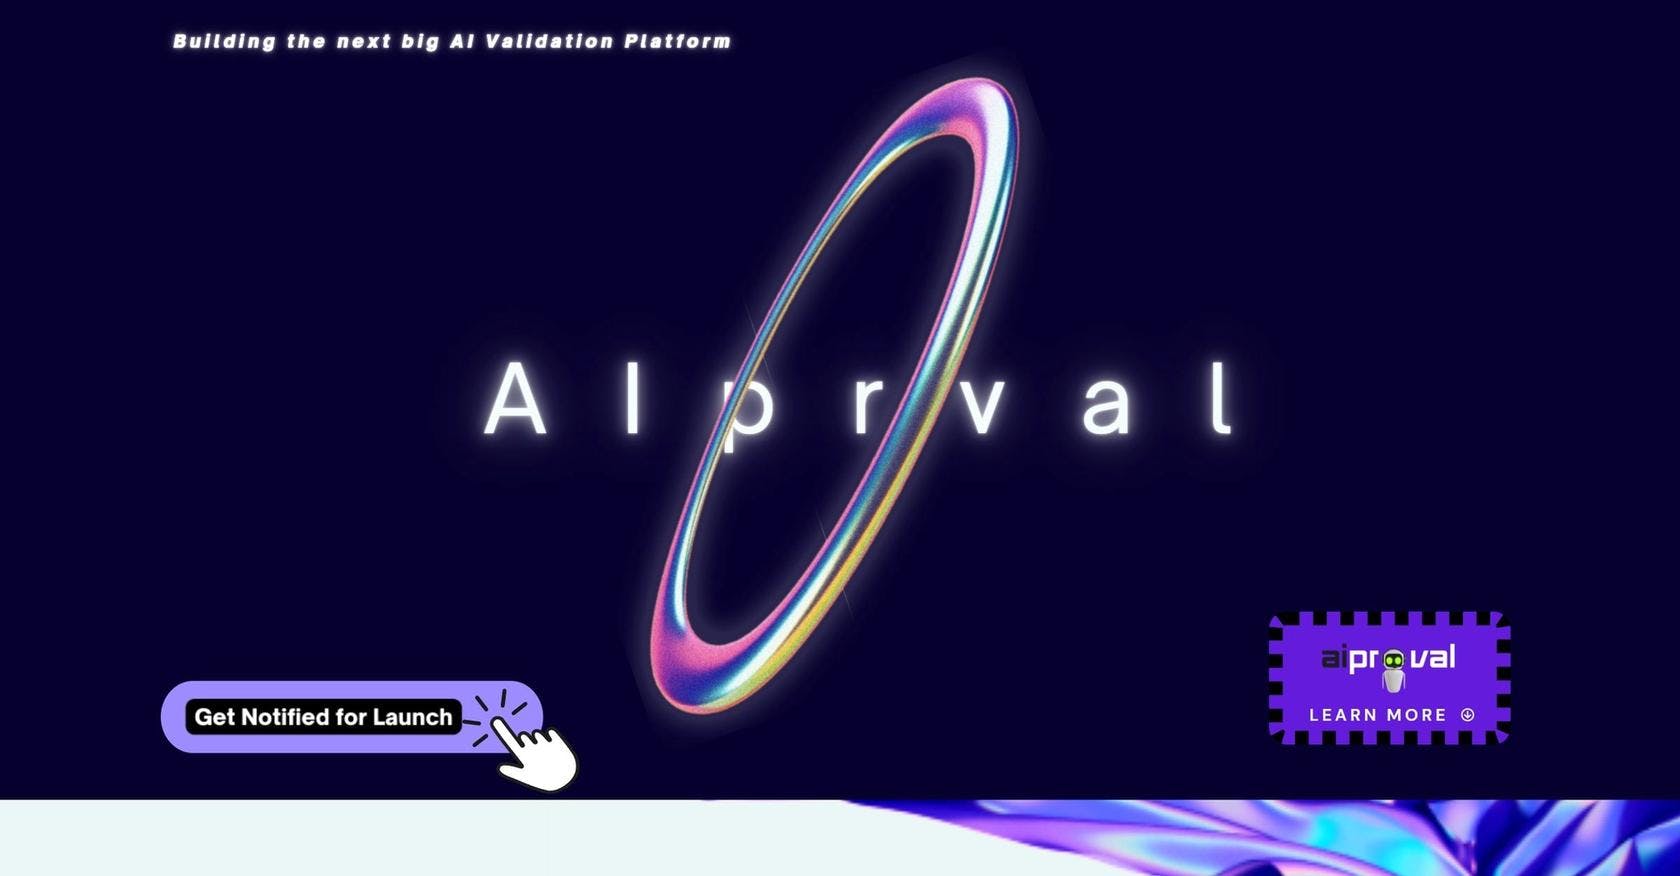 AIproval